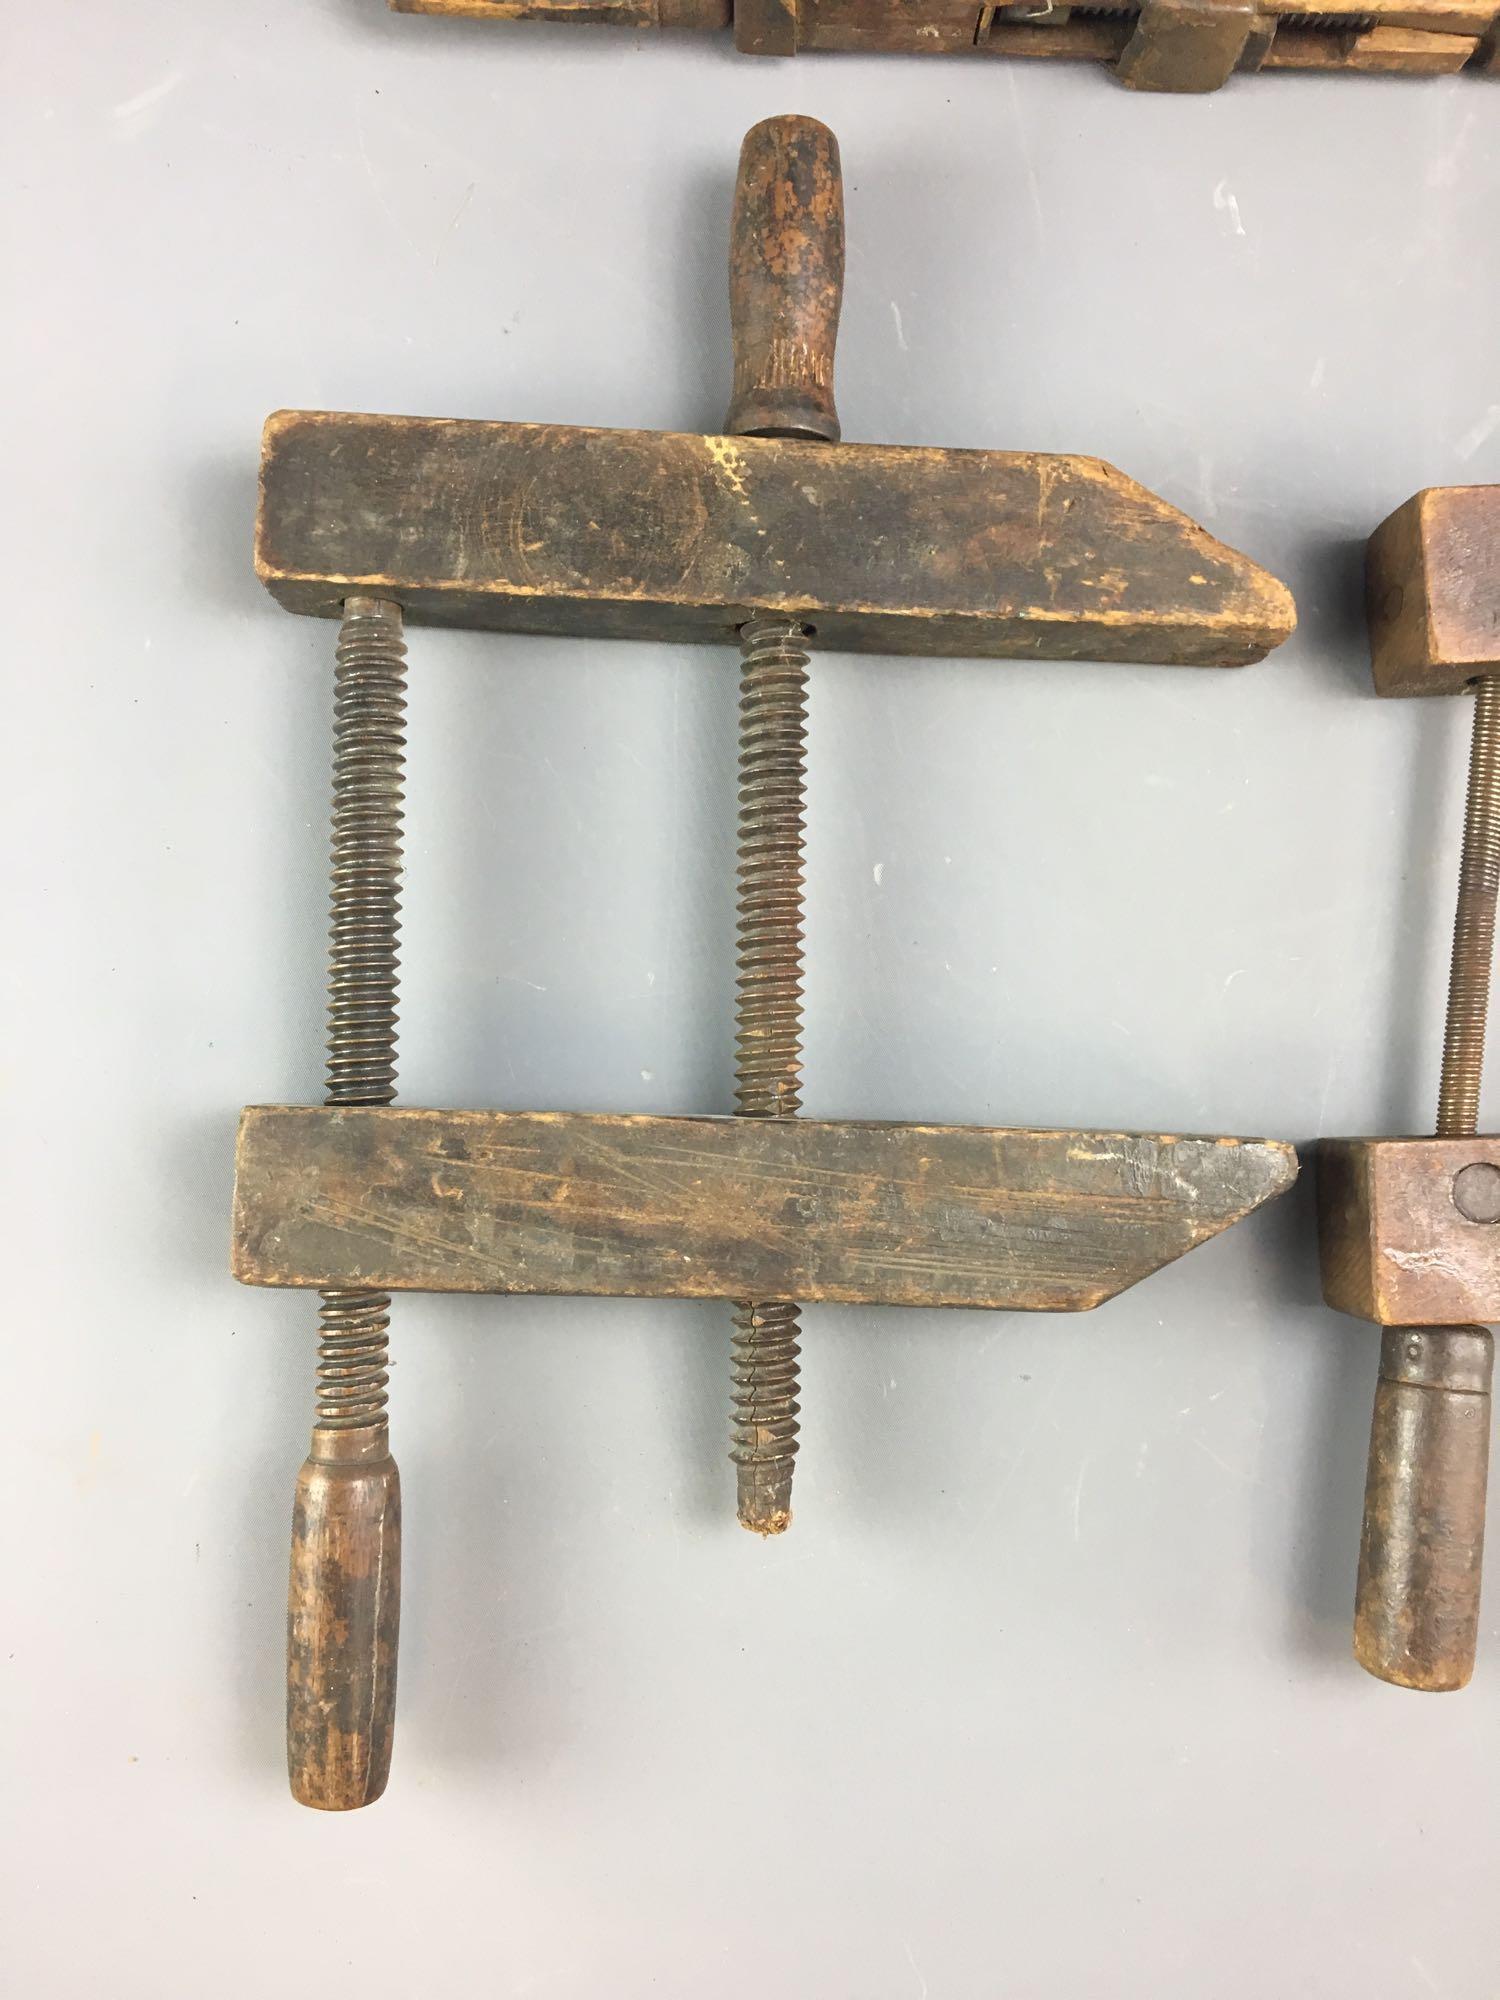 Group of 4 Antique Wooden Clamps